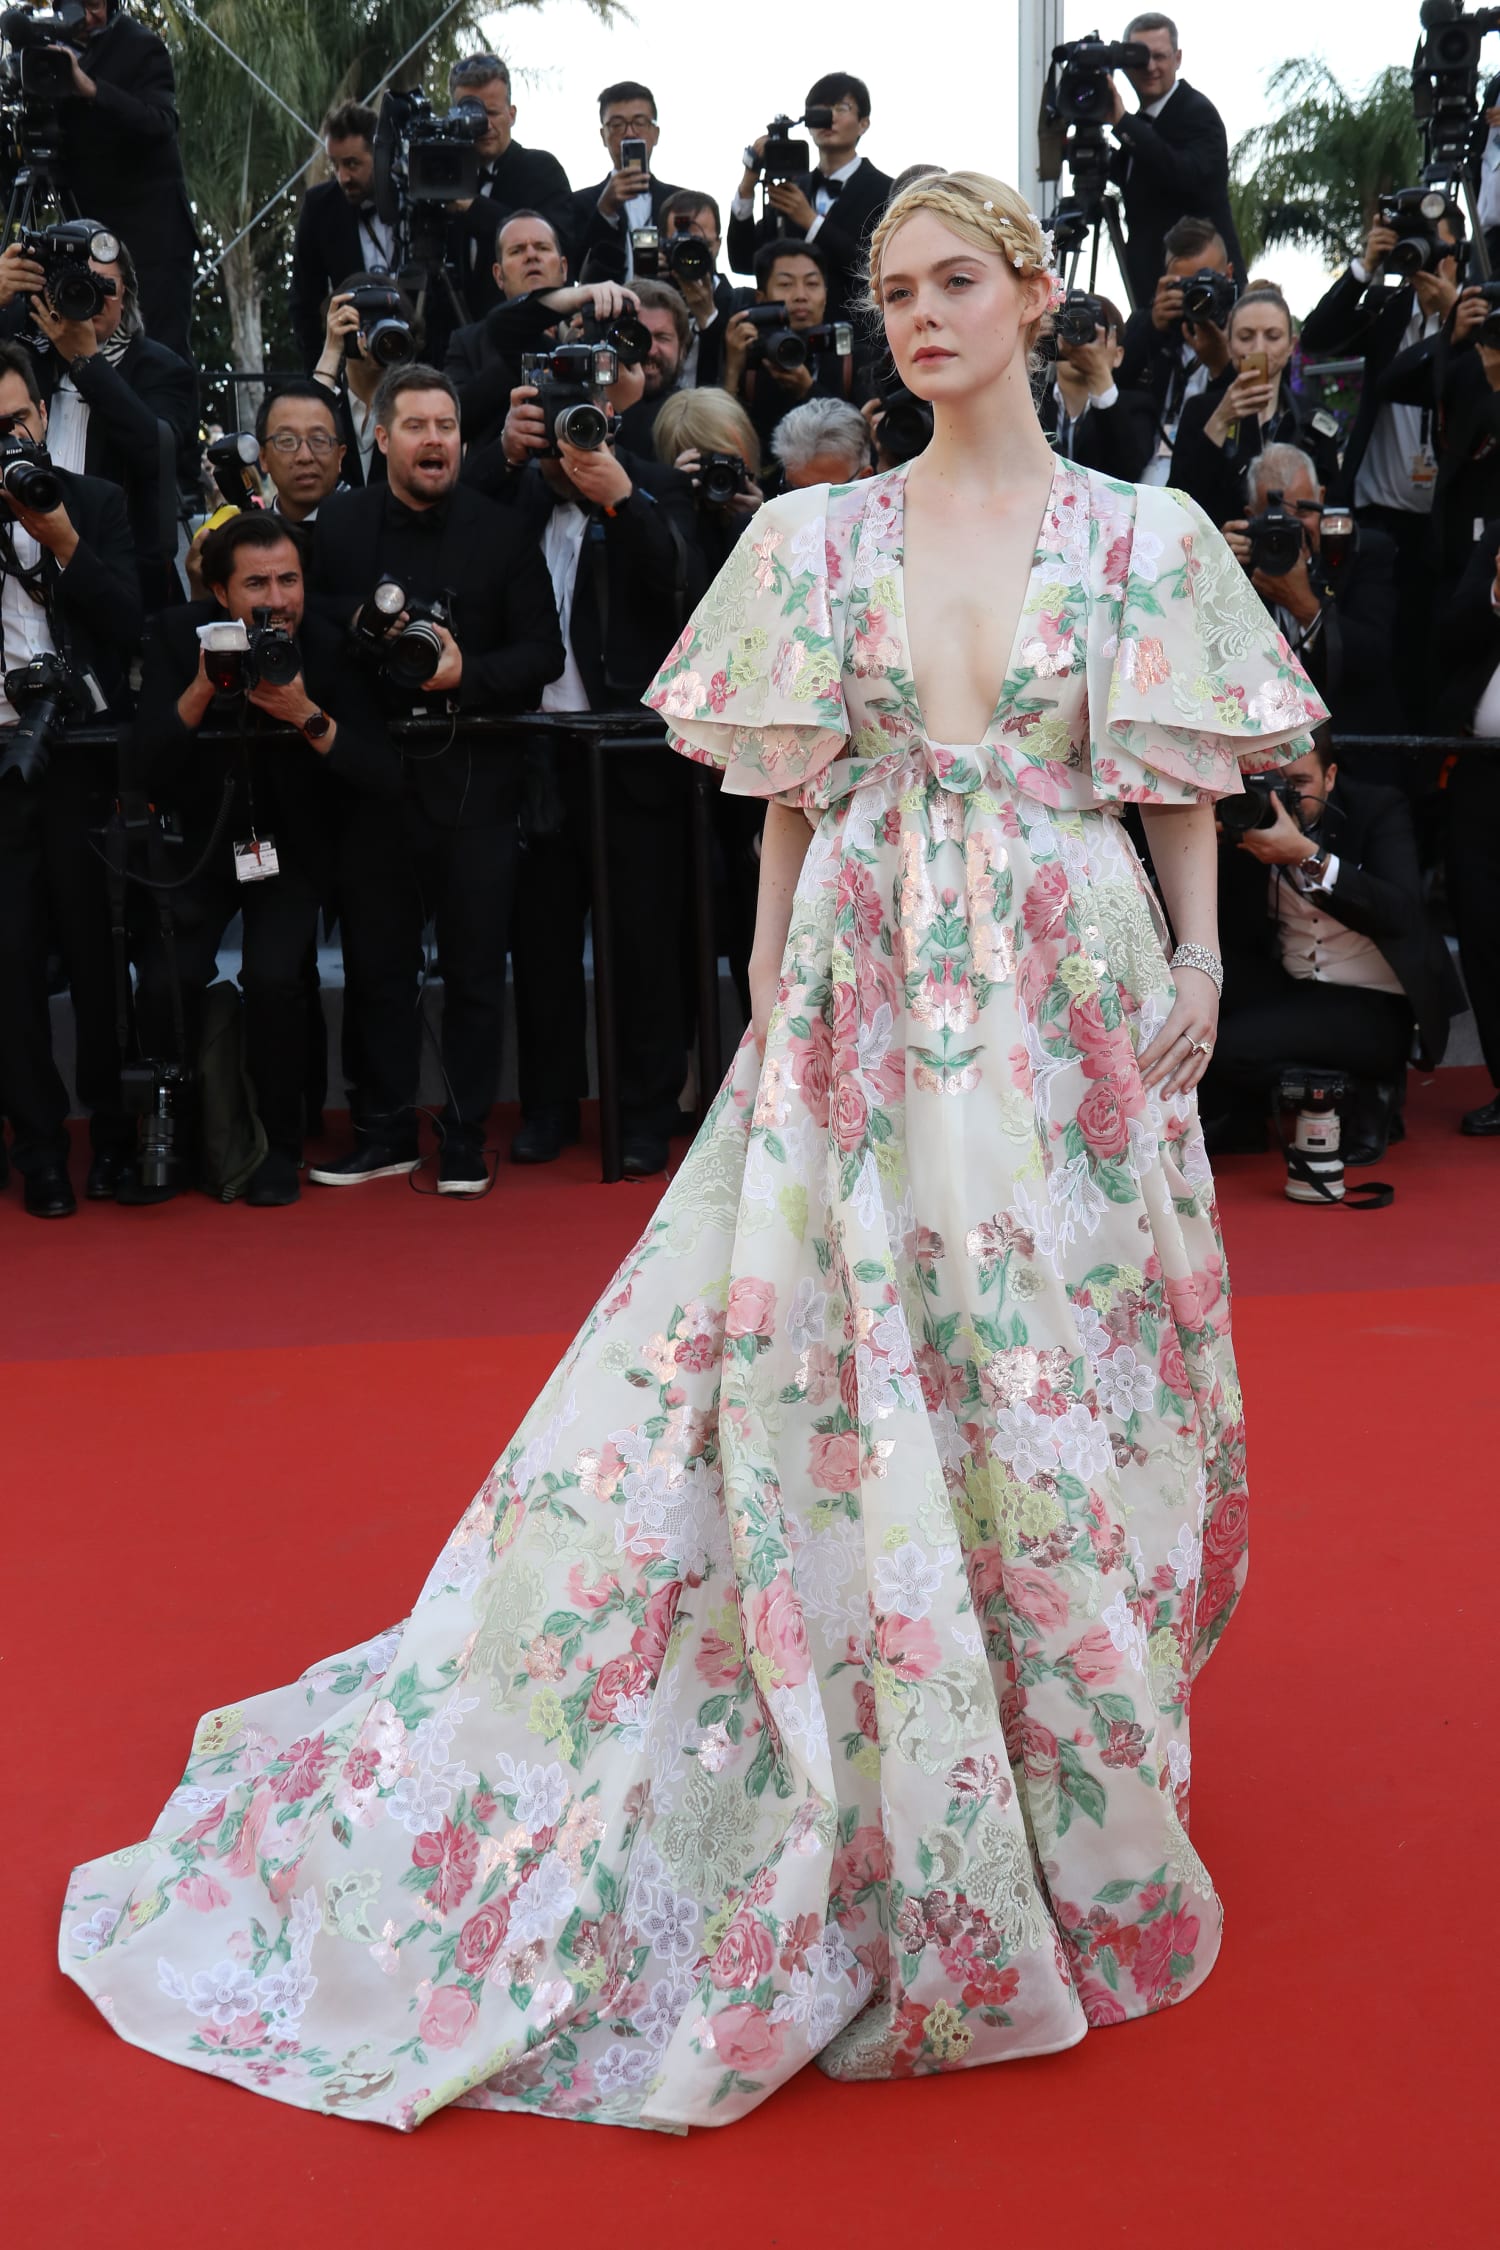 Syd tynd Behov for See the Cannes Film Festival 2019 red carpet and best-dressed stars